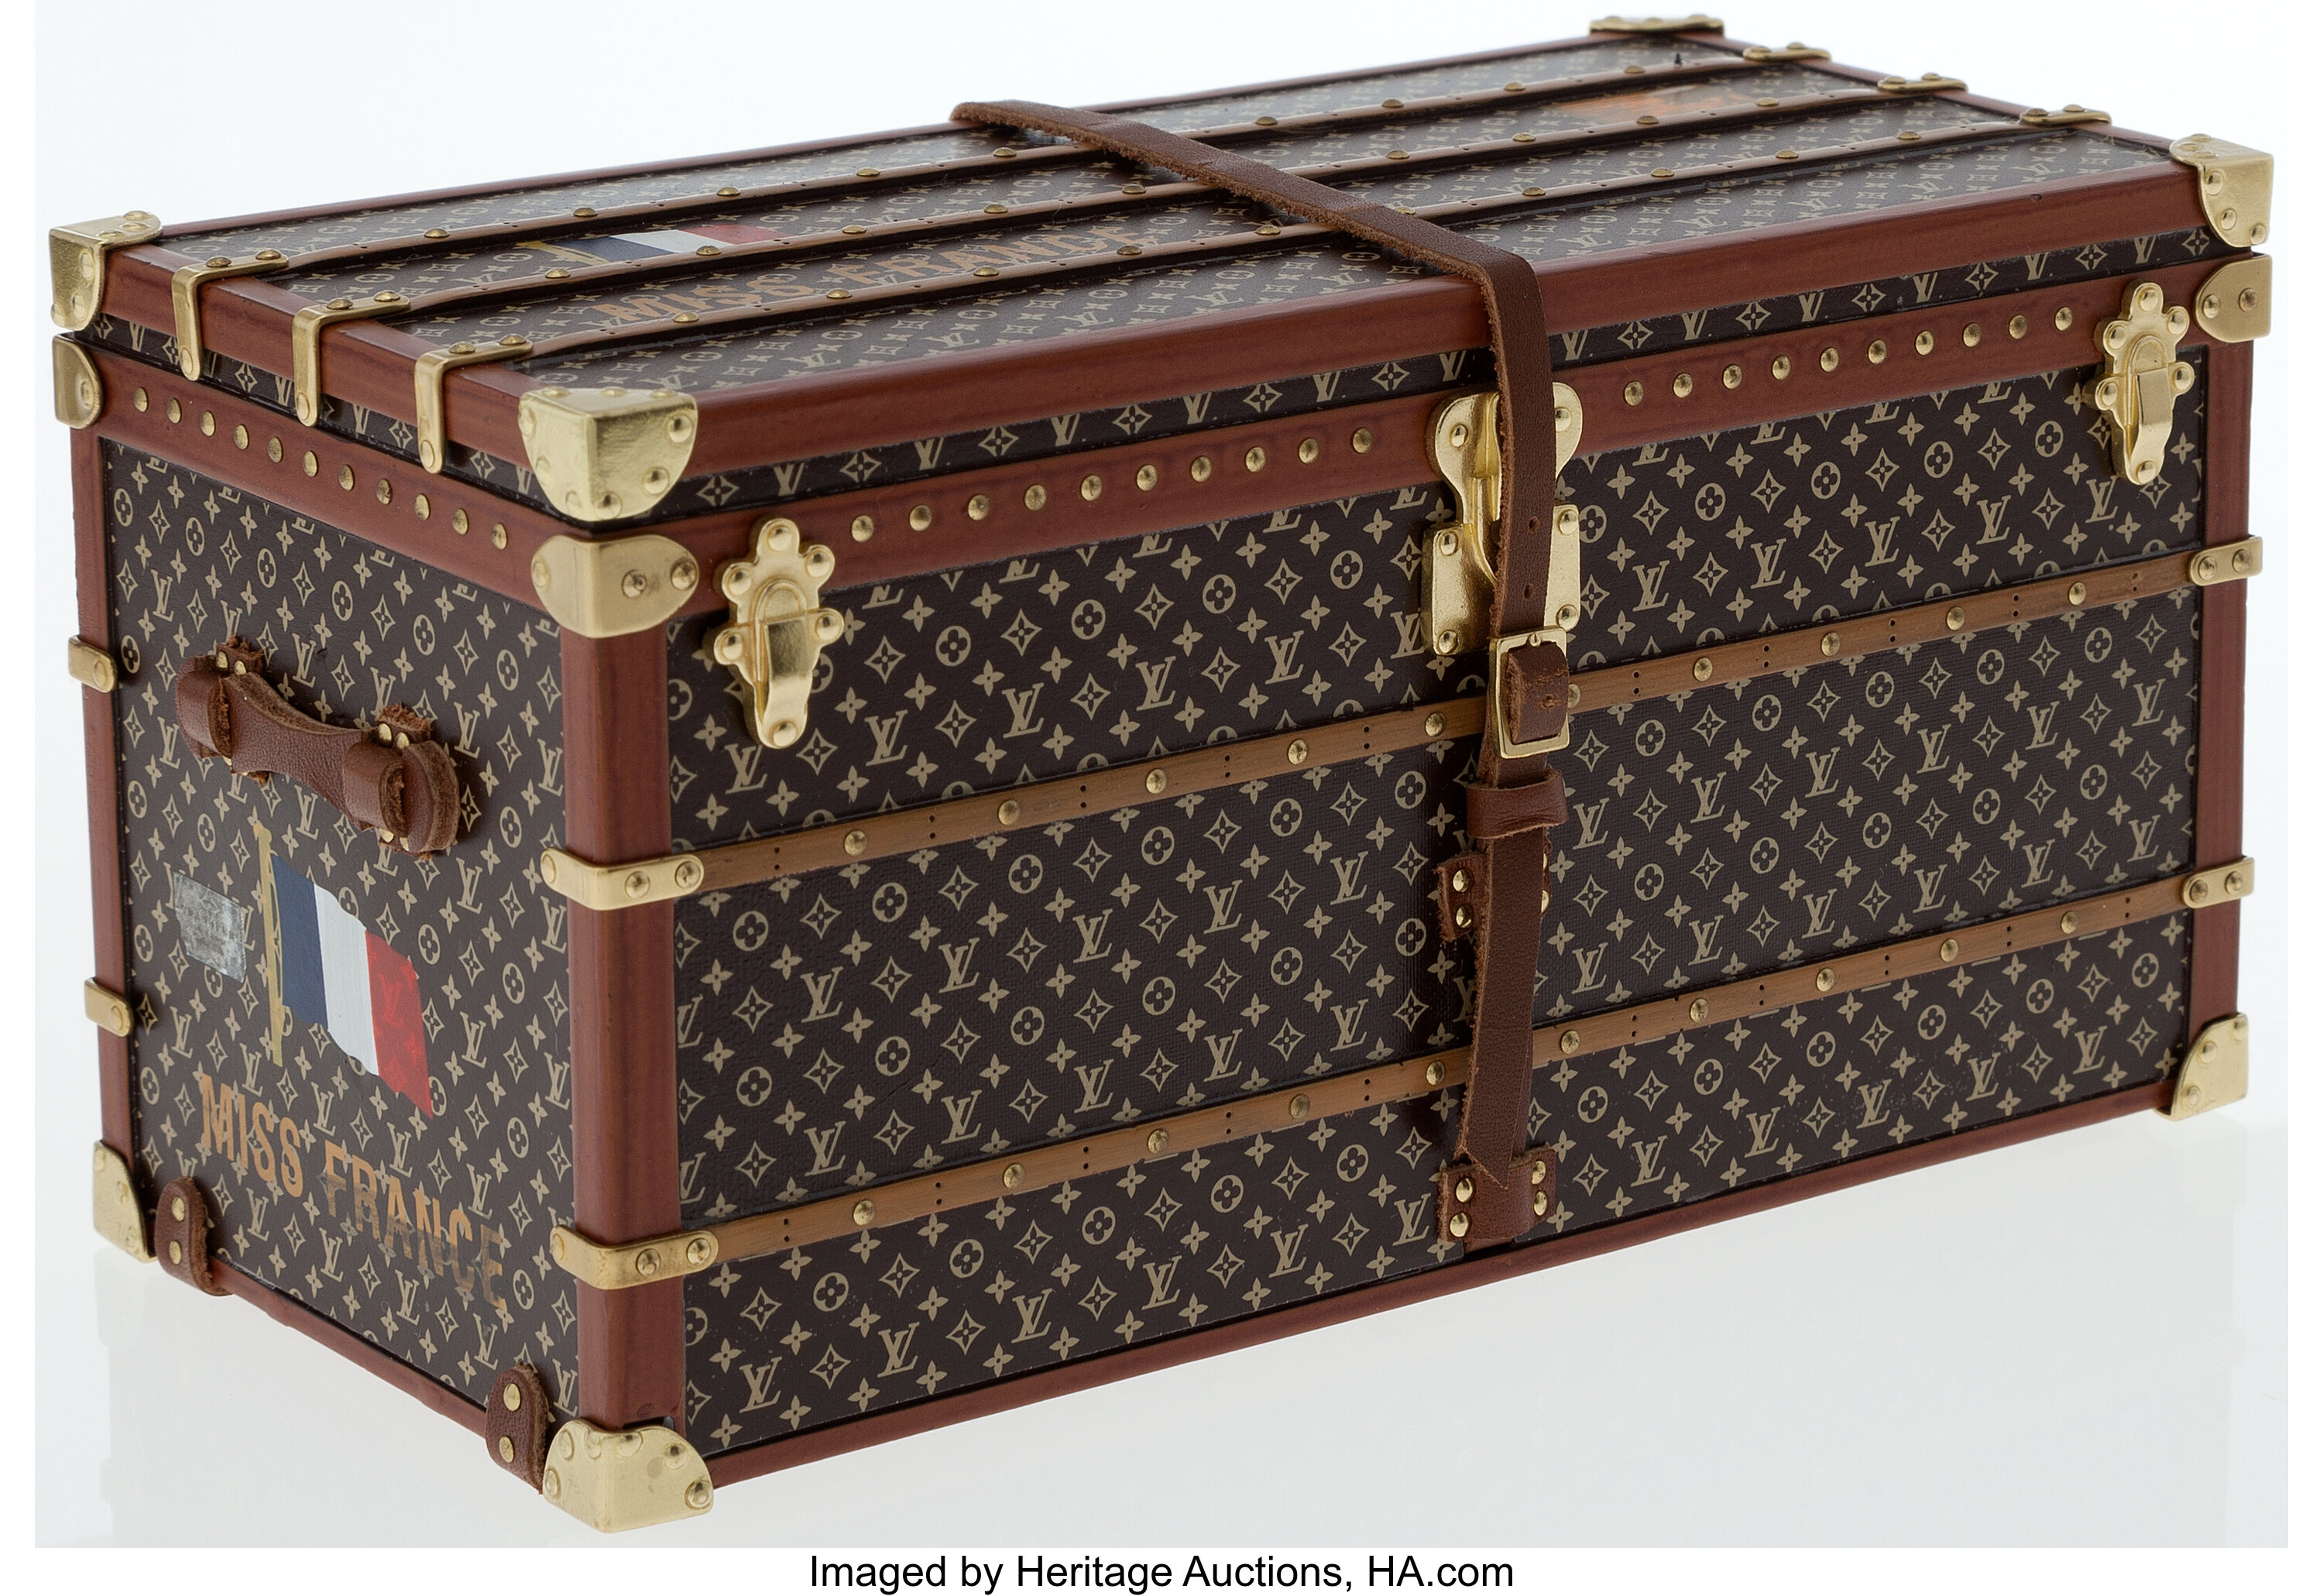 Louis Vuitton Hosts VIP Opening of New York Trunks Exhibit With